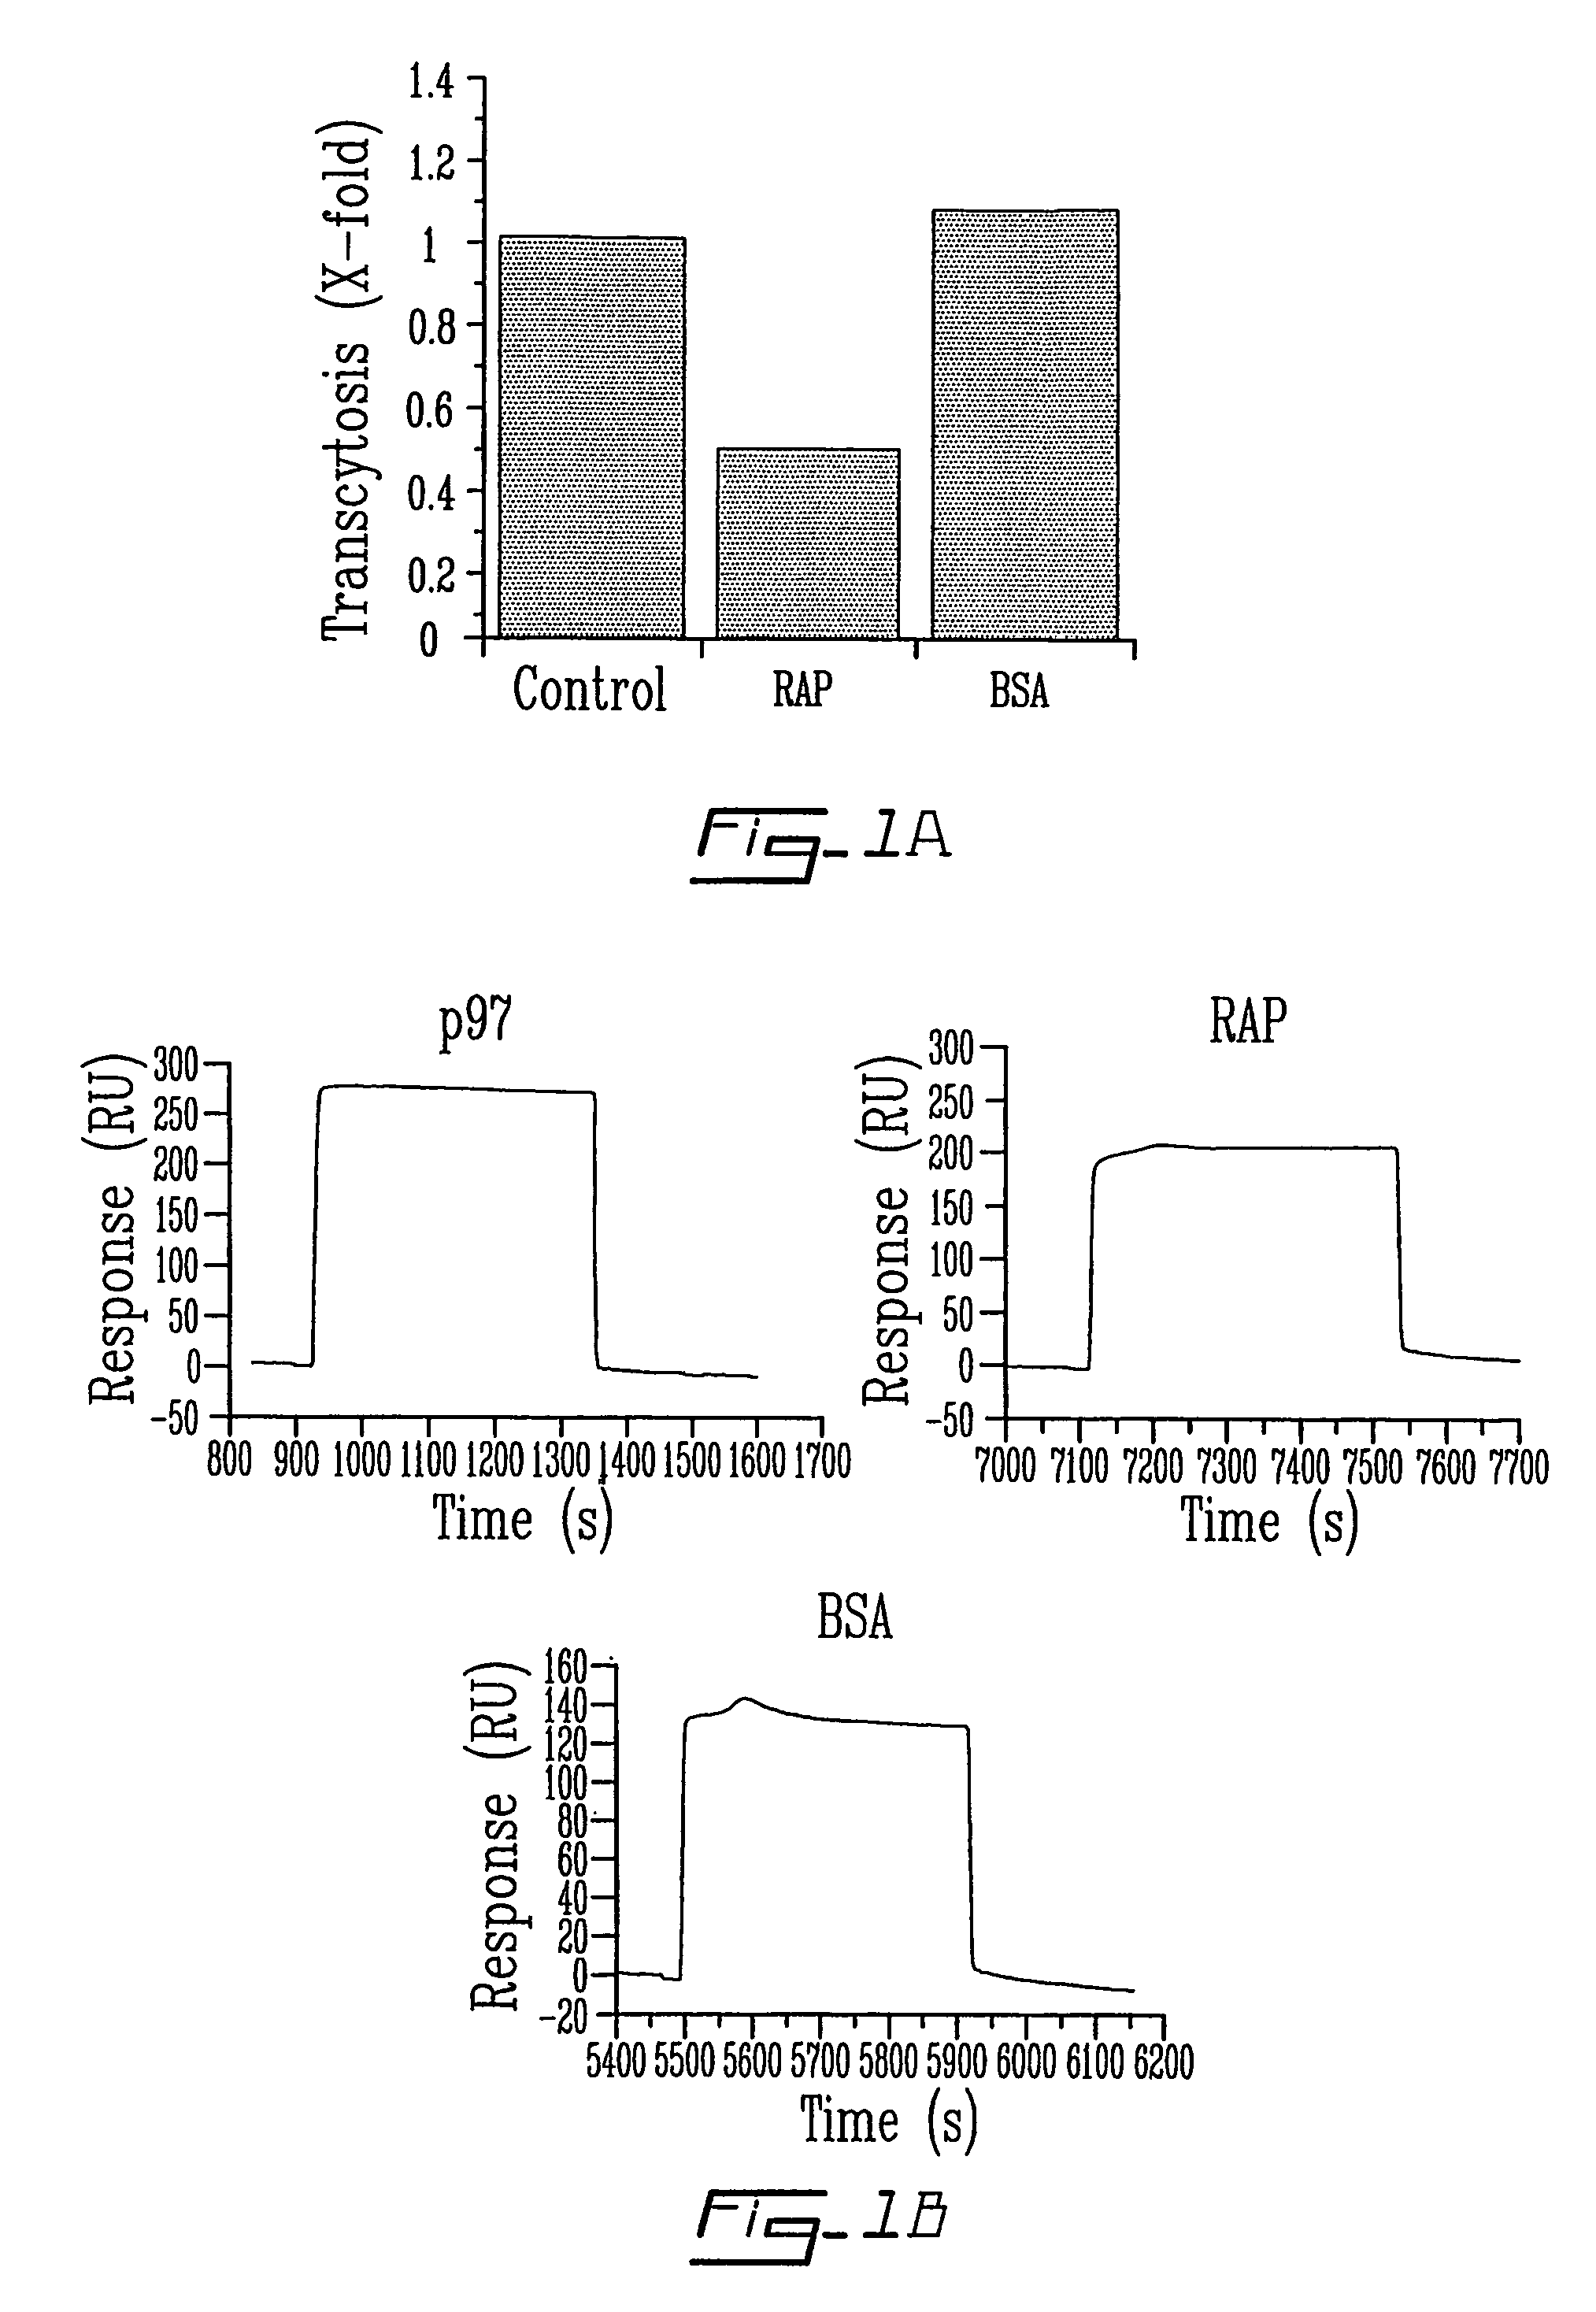 Compound and method for regulating plasminogen activation and cell migration